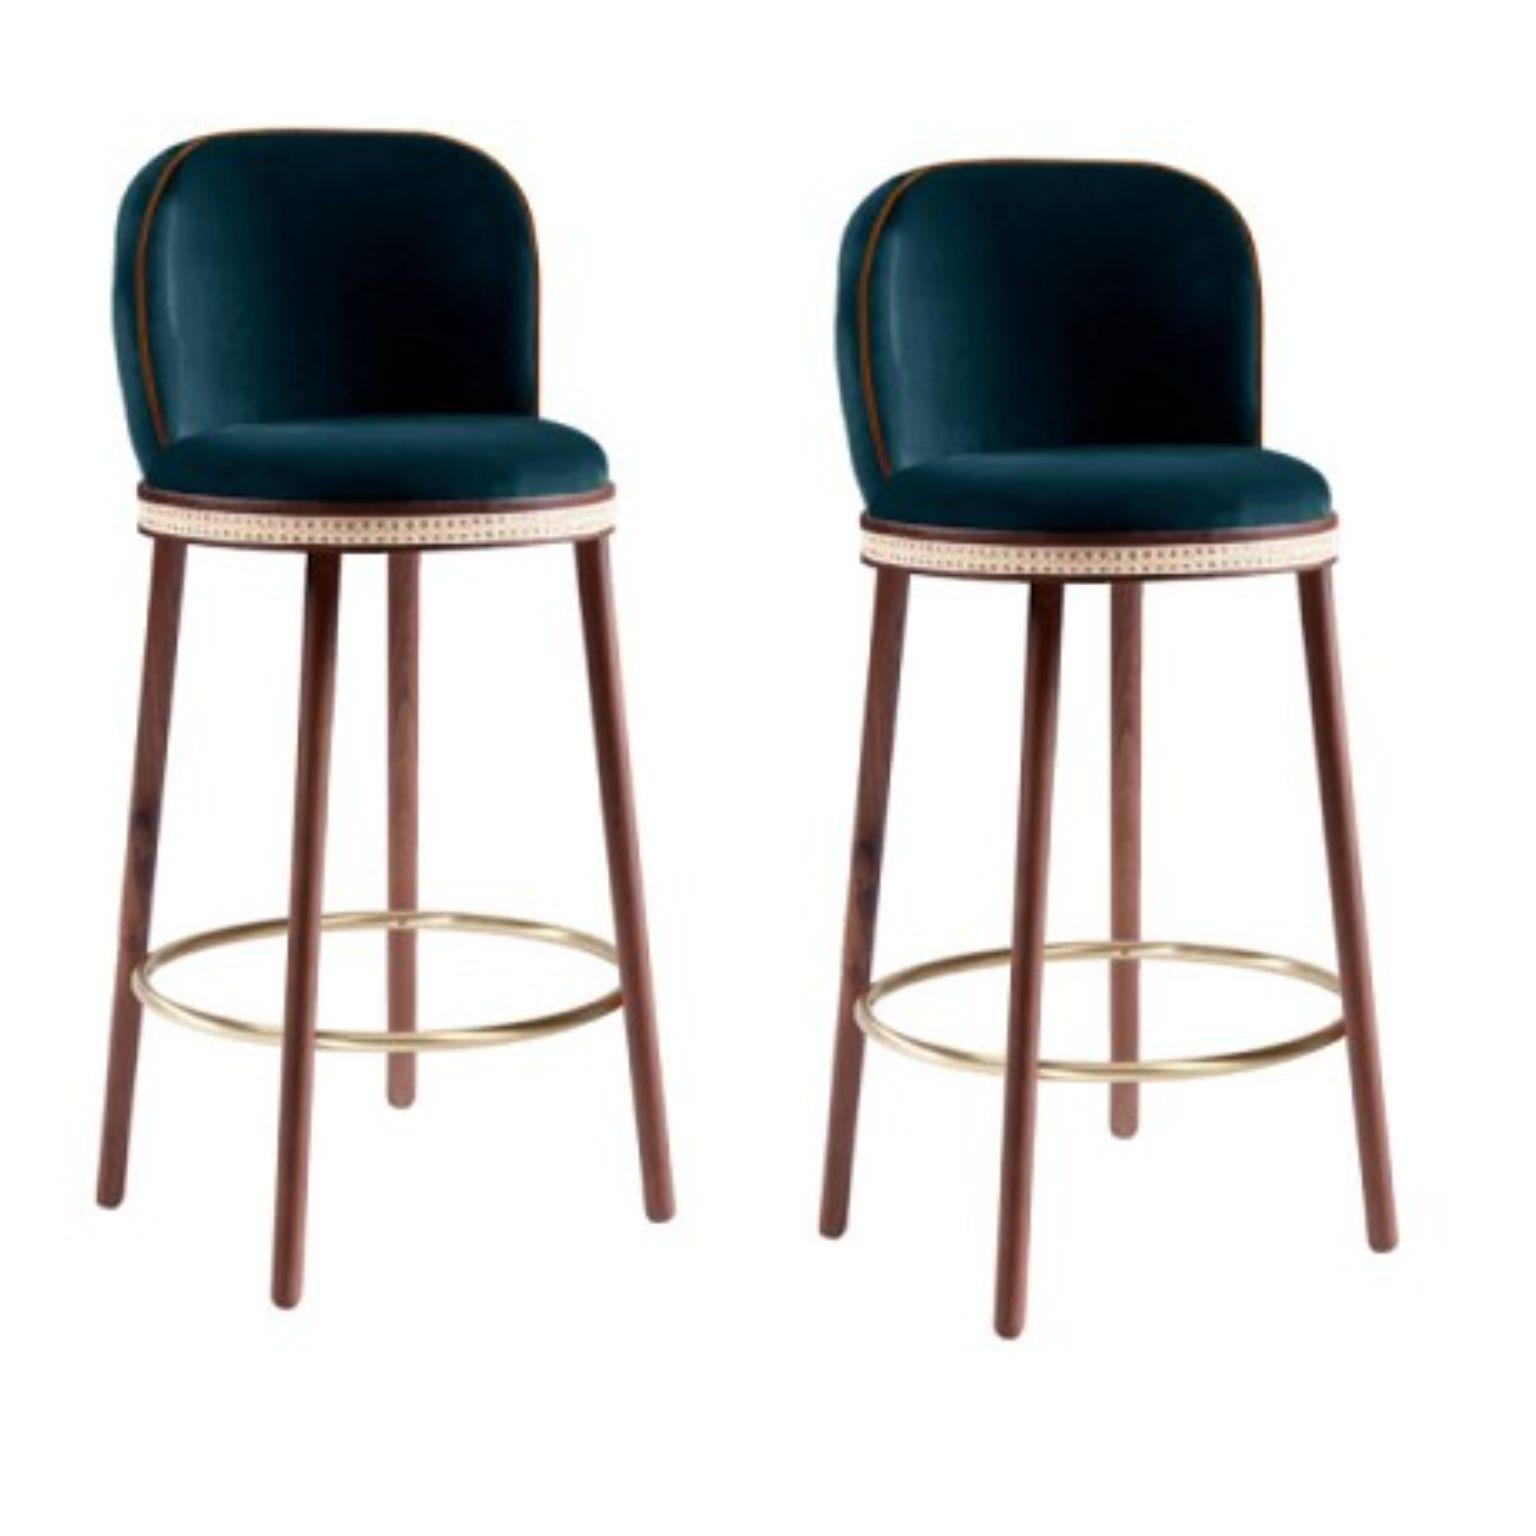 Set of 2 bar chairs, Alma by Dooq
Dimensions:
W 46 cm 18”
D 51 cm 20”
H 100 cm 39”
seat height: 75 cm 30”
Materials: upholstery fabric or leather; structure solid wood feet lacquered MDF or solid wood rattan natural rattan. COM with natural